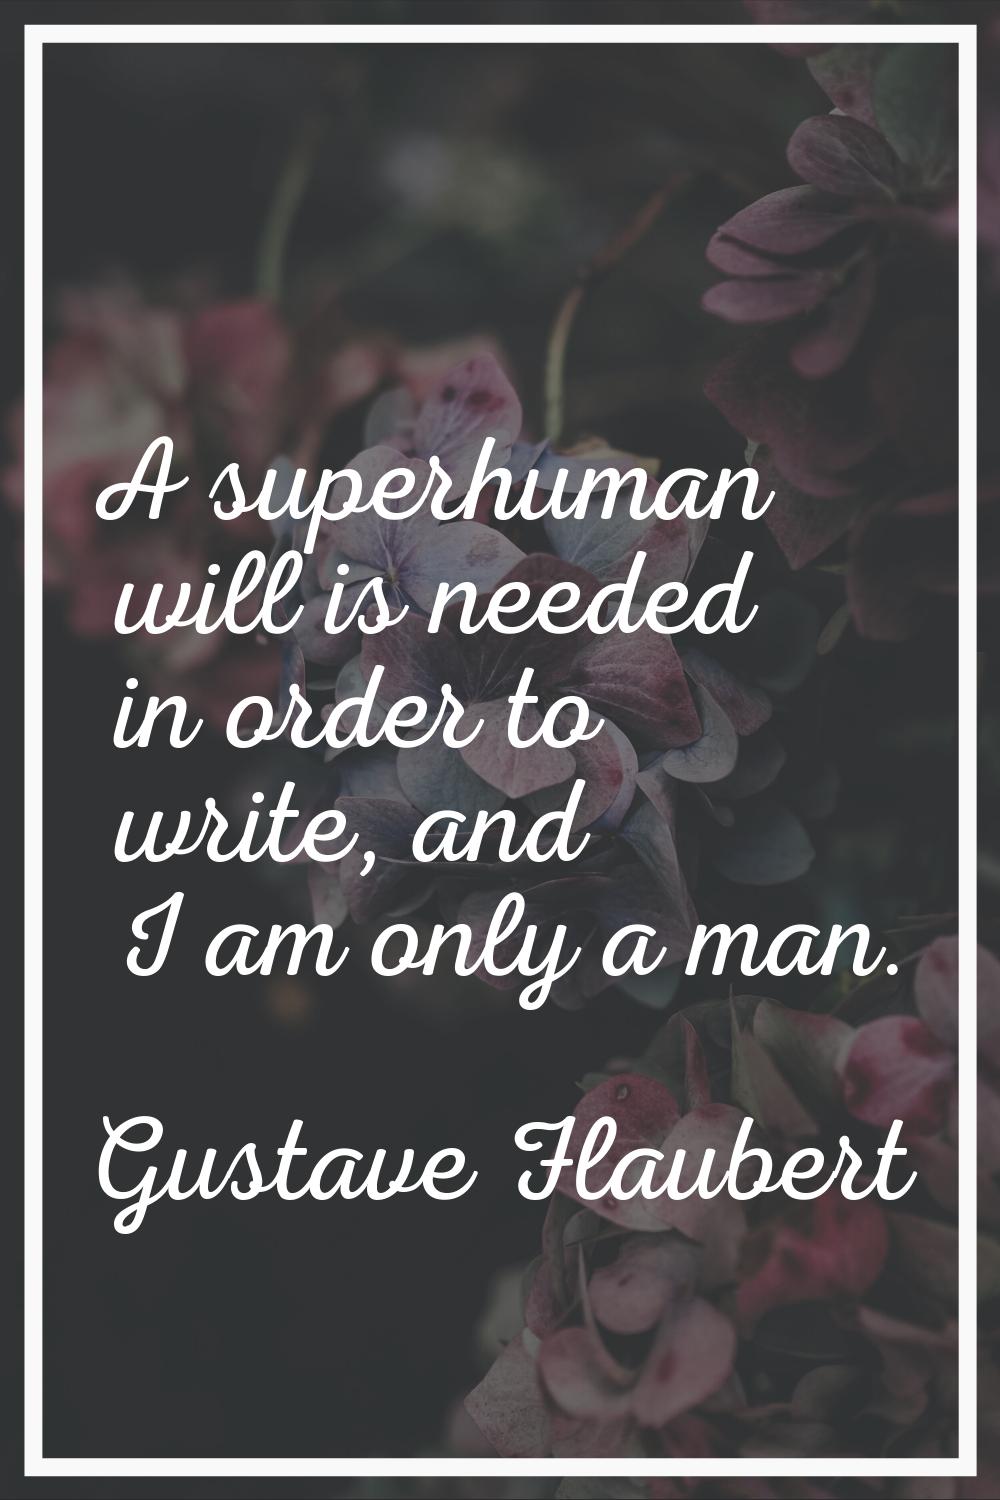 A superhuman will is needed in order to write, and I am only a man.